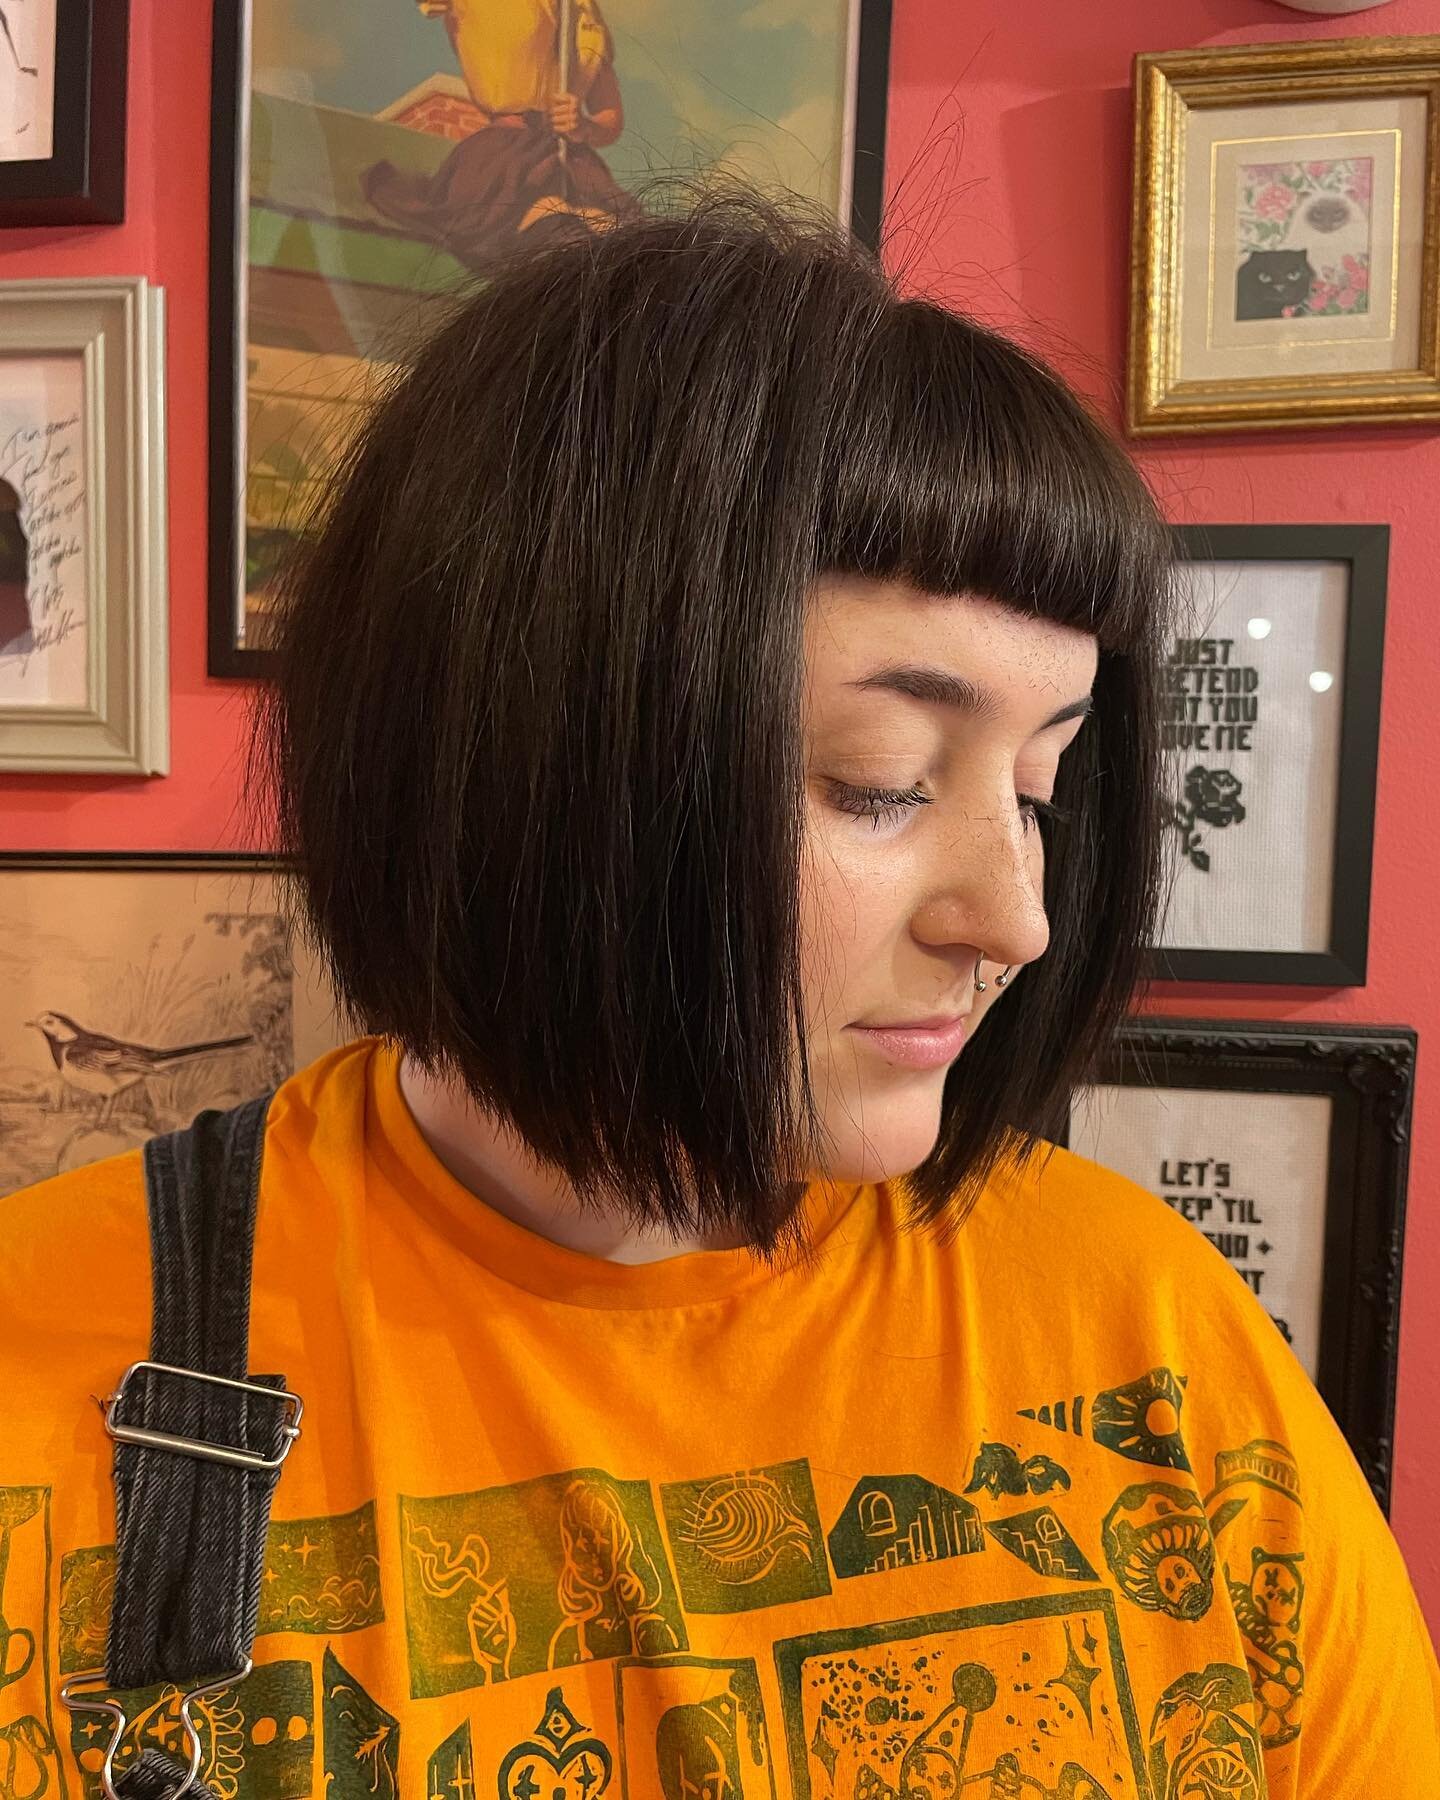 &ldquo;I can't drown my demons, they know how to swim&rdquo;
.
.
.
.
.
✂️ Hair by Becca @heartbreakhairclub 
#hair #hairdressing #manchester #manchesterhairdresser #hairstylist #haircolourist #stylist #haircut #bob #choppybob #bluntfringe #grownupemo